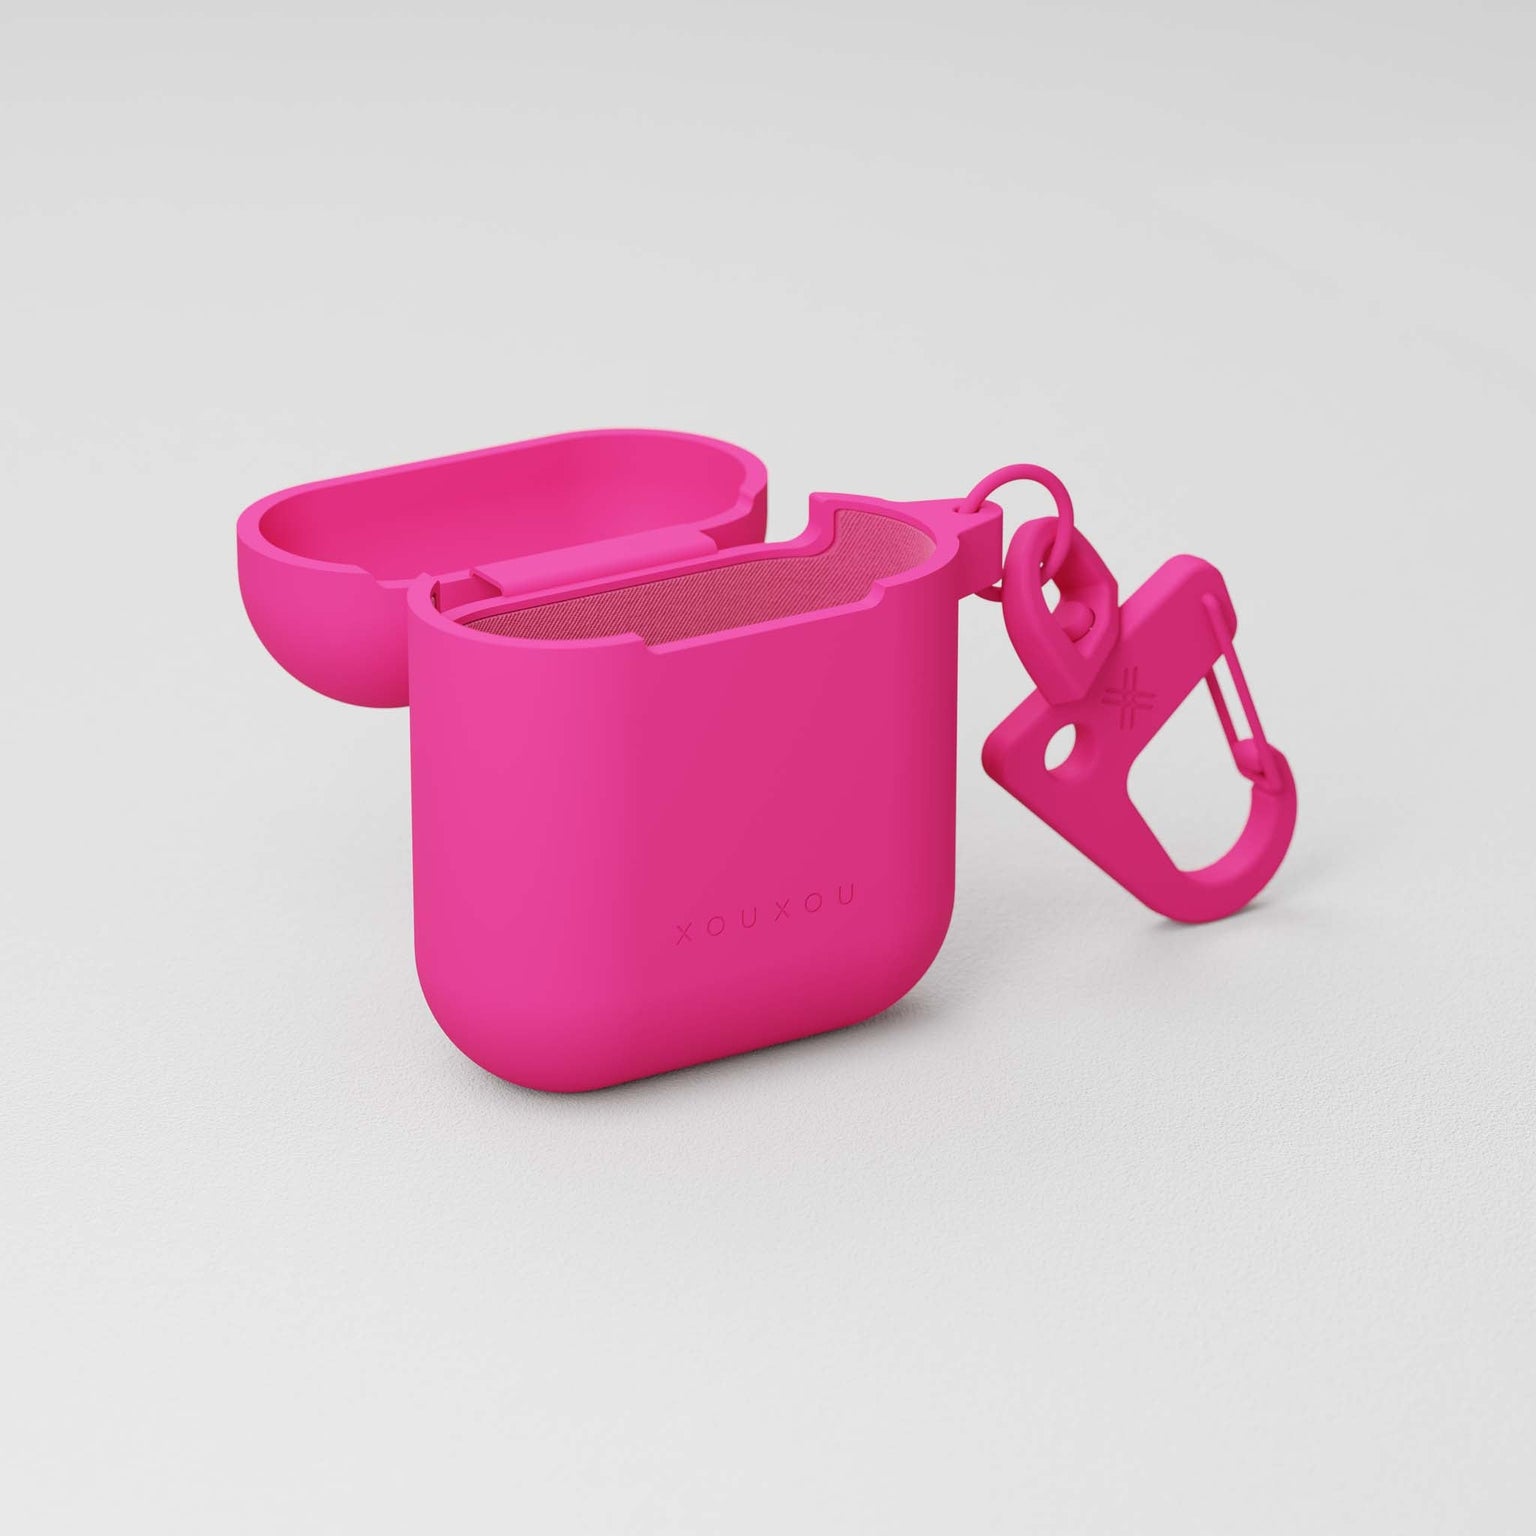 Pink Apple AirPods 1st & 2nd generation case with soft-touch finish and carabiner | XOUXOU